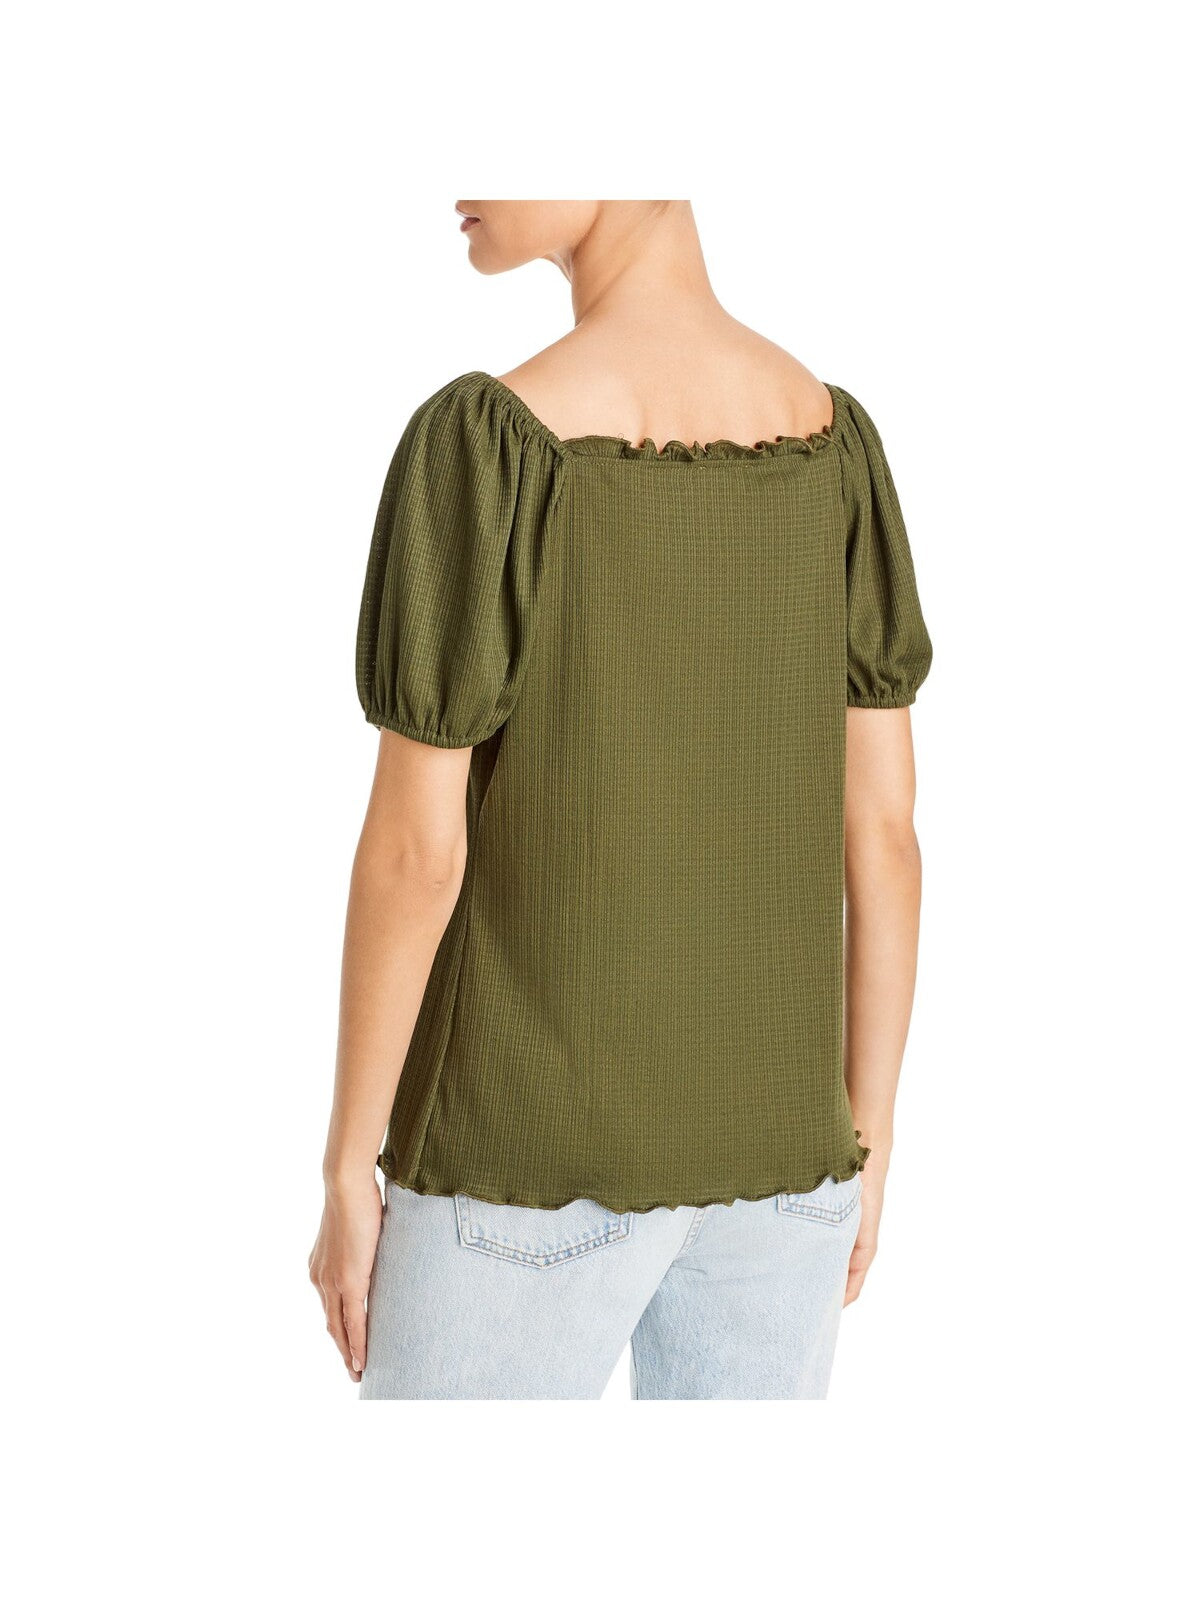 STATUS BY CHENAULT Womens Green Stretch Ruffled Pleated Scalloped Ruched Pouf Sleeve Off Shoulder Top S